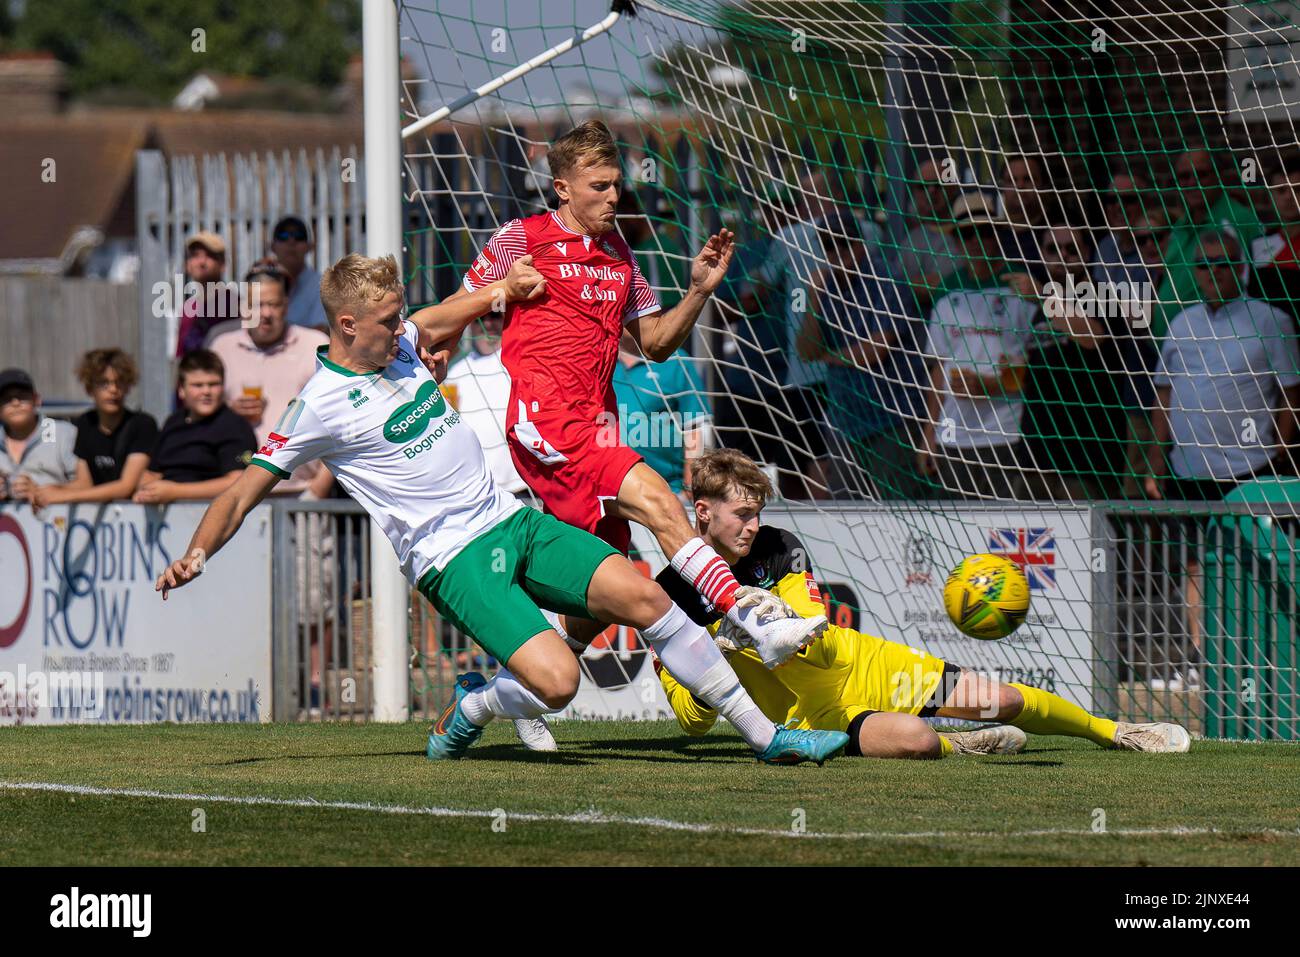 Isthmian League Premier goal action: Bognor Regis goalkeeper Toby Steward and defender Tom Bragg tackle Hornchurch to keep the ball out of the net. Stock Photo